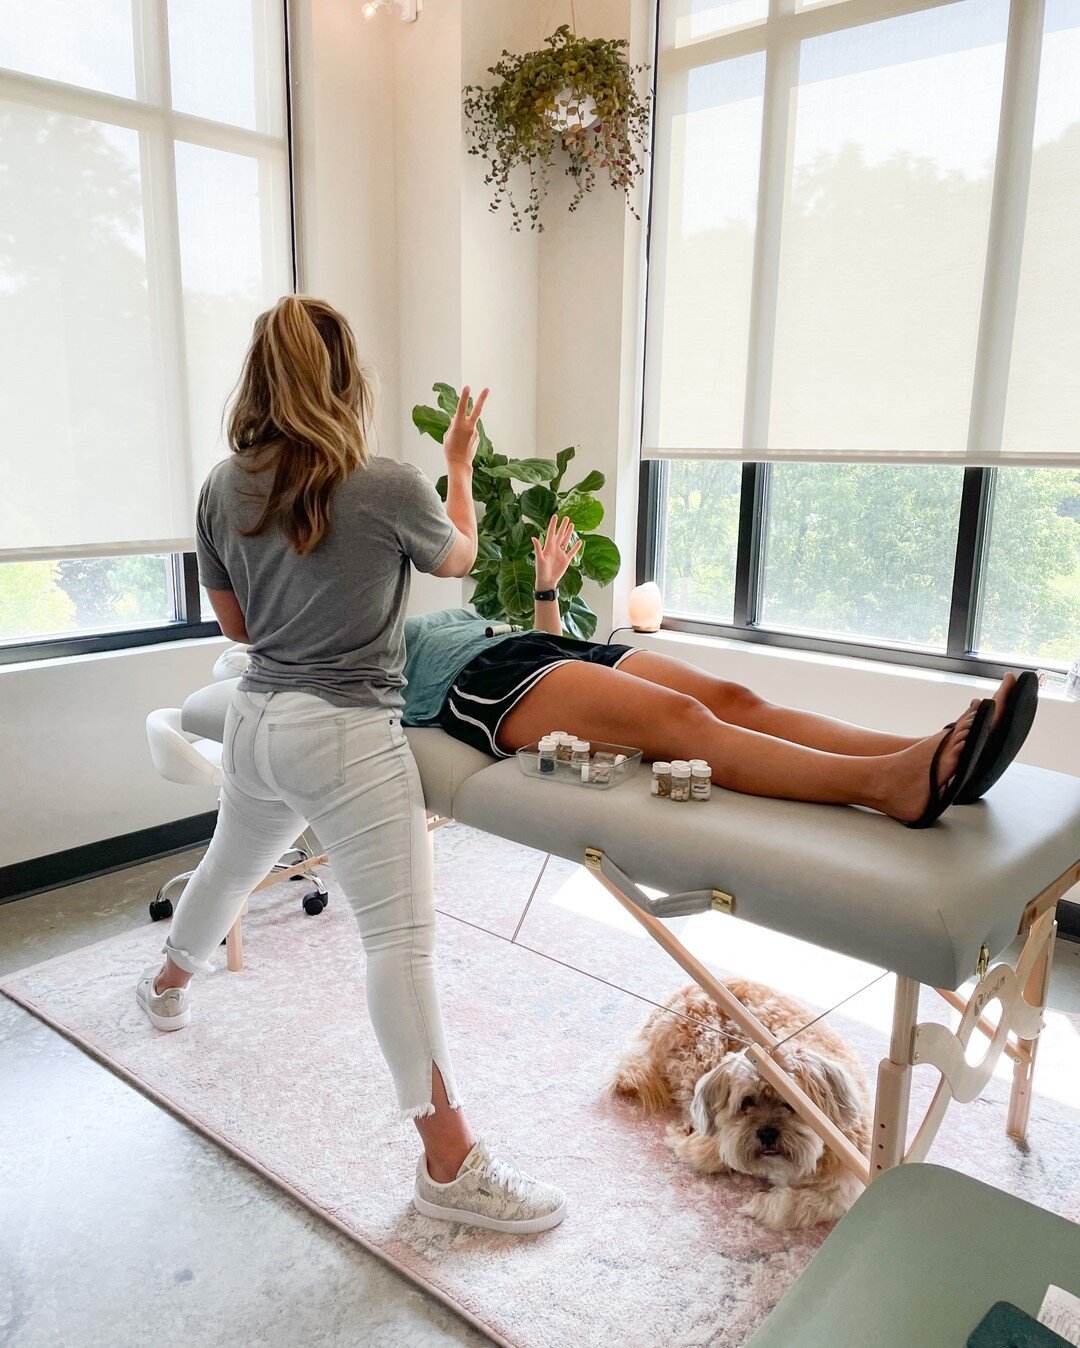 Lay down and relax, we are one step closer to naturally supporting your body and allowing it to function as it was intended 🙌🏼🌿⠀⠀⠀⠀⠀⠀⠀⠀⠀
⠀⠀⠀⠀⠀⠀⠀⠀⠀
P.S. Also how we feel being halfway through the week!✌️😂